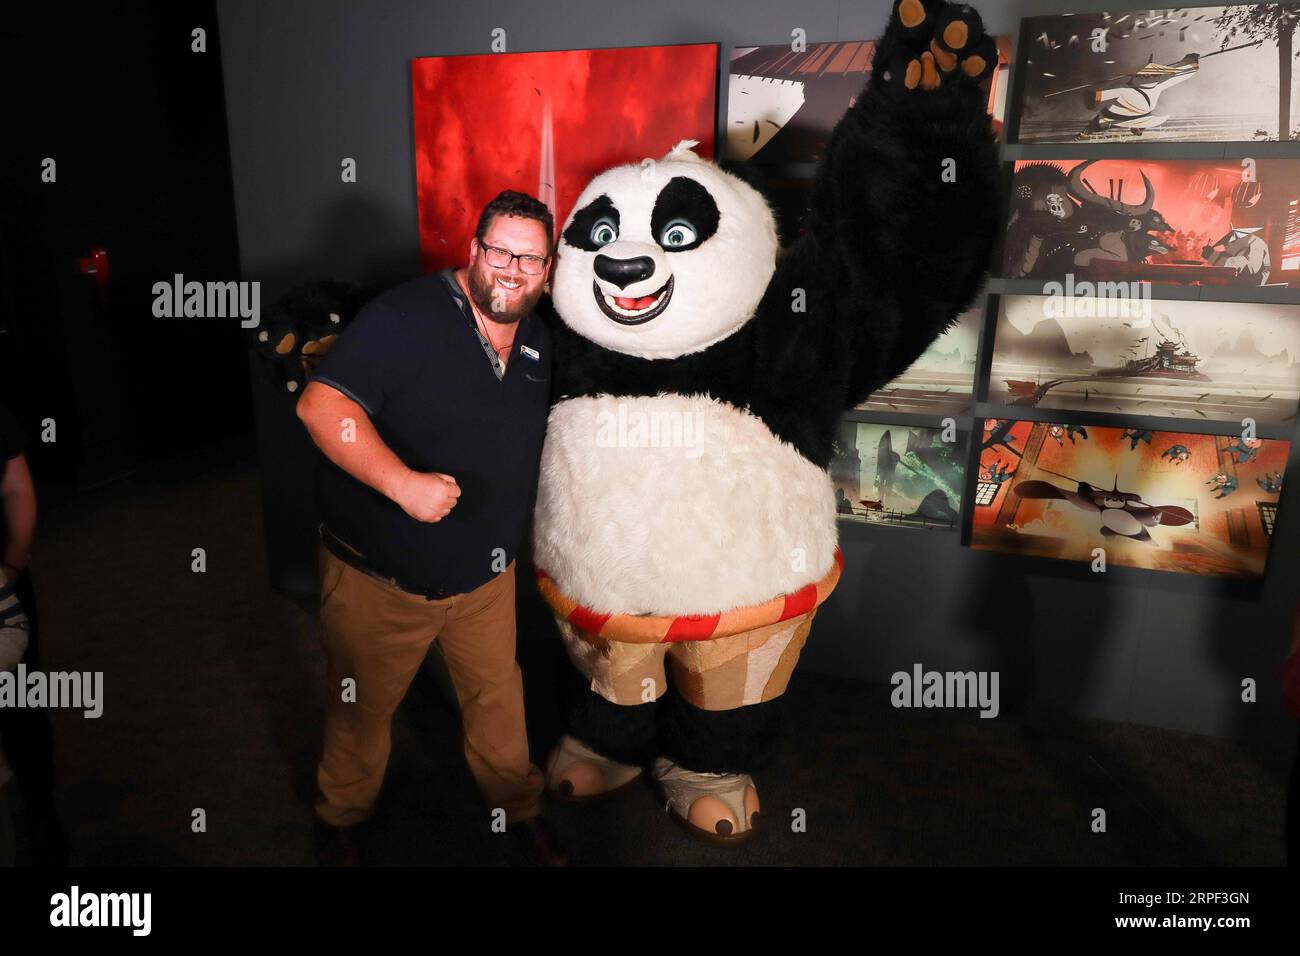 (190911) -- CANBERRA, Sept. 11, 2019 -- A visitor poses with the character in Kung Fu Panda , at an exhibition on DreamWorks Animation in the National Museum of Australia (NMA) in Canberra, Australia, Sept. 11, 2019. NMA will launch the DreamWorks Animation: The Exhibition on Thursday. Running until Feb. 2, 2020, the exhibition features more than 400 items from 33 DreamWorks Animation films, including Shrek, Madagascar, Kung Fu Panda, Prince of Egypt, How to Train Your Dragon. TO GO WITH Feature: Walking into the world of Shrek and Kung Fu Panda ) AUSTRALIA-CANBERRA-EXHIBITION-DREAMWORKS ANIMA Stock Photo